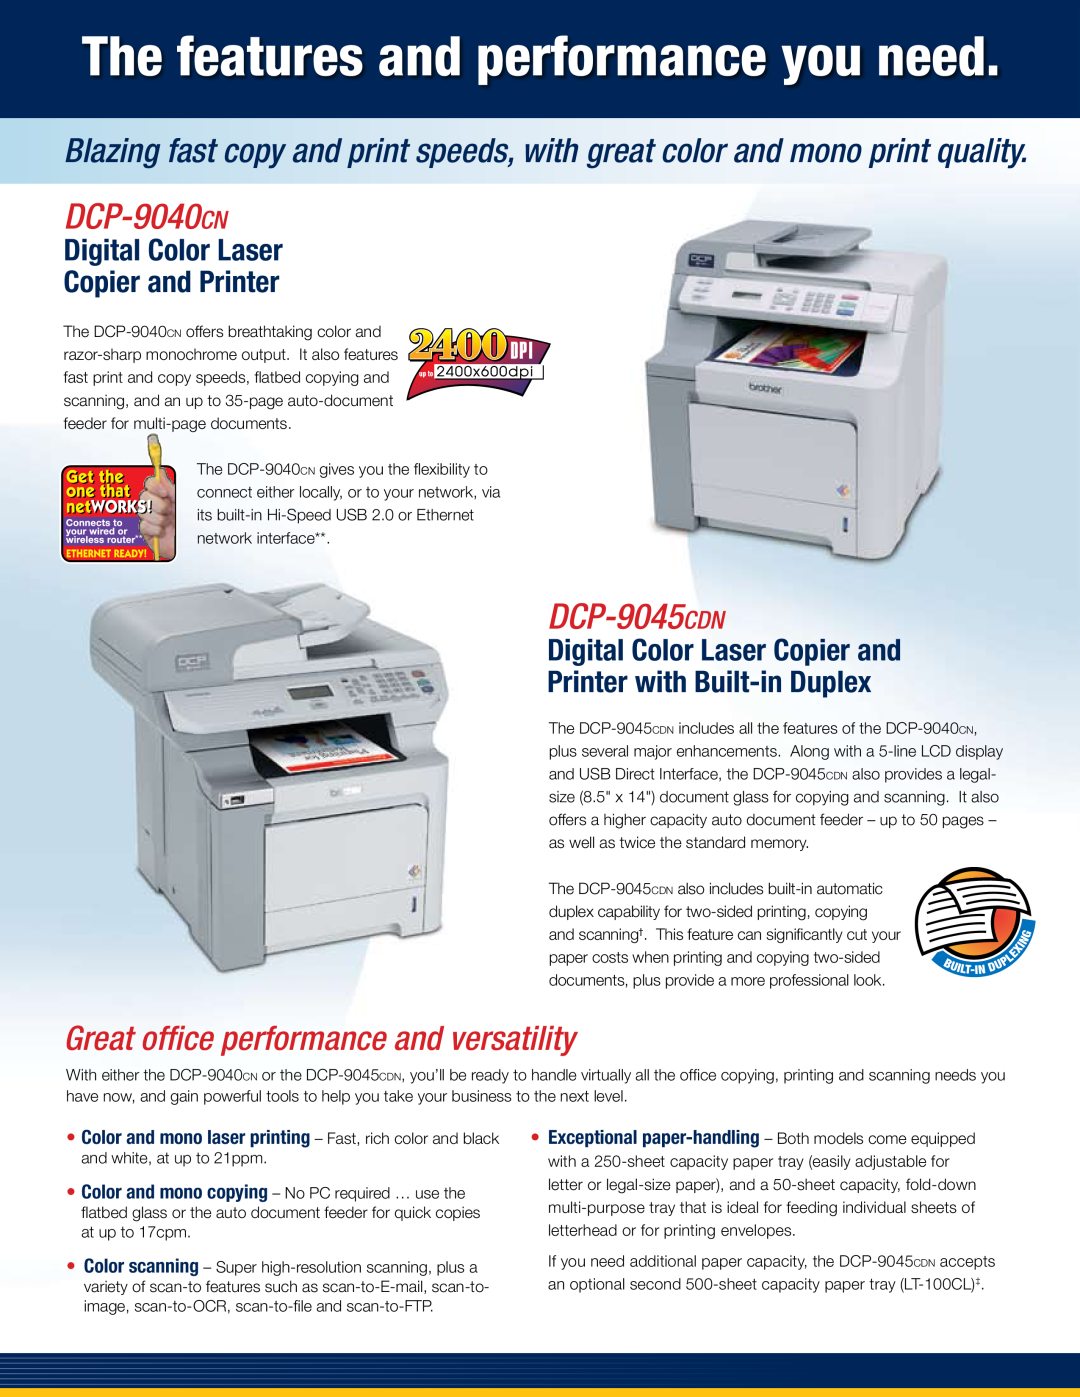 Brother DCP9040CN The features and performance you need, Great office performance and versatility, DCP-9040cn, DCP-9045cdn 